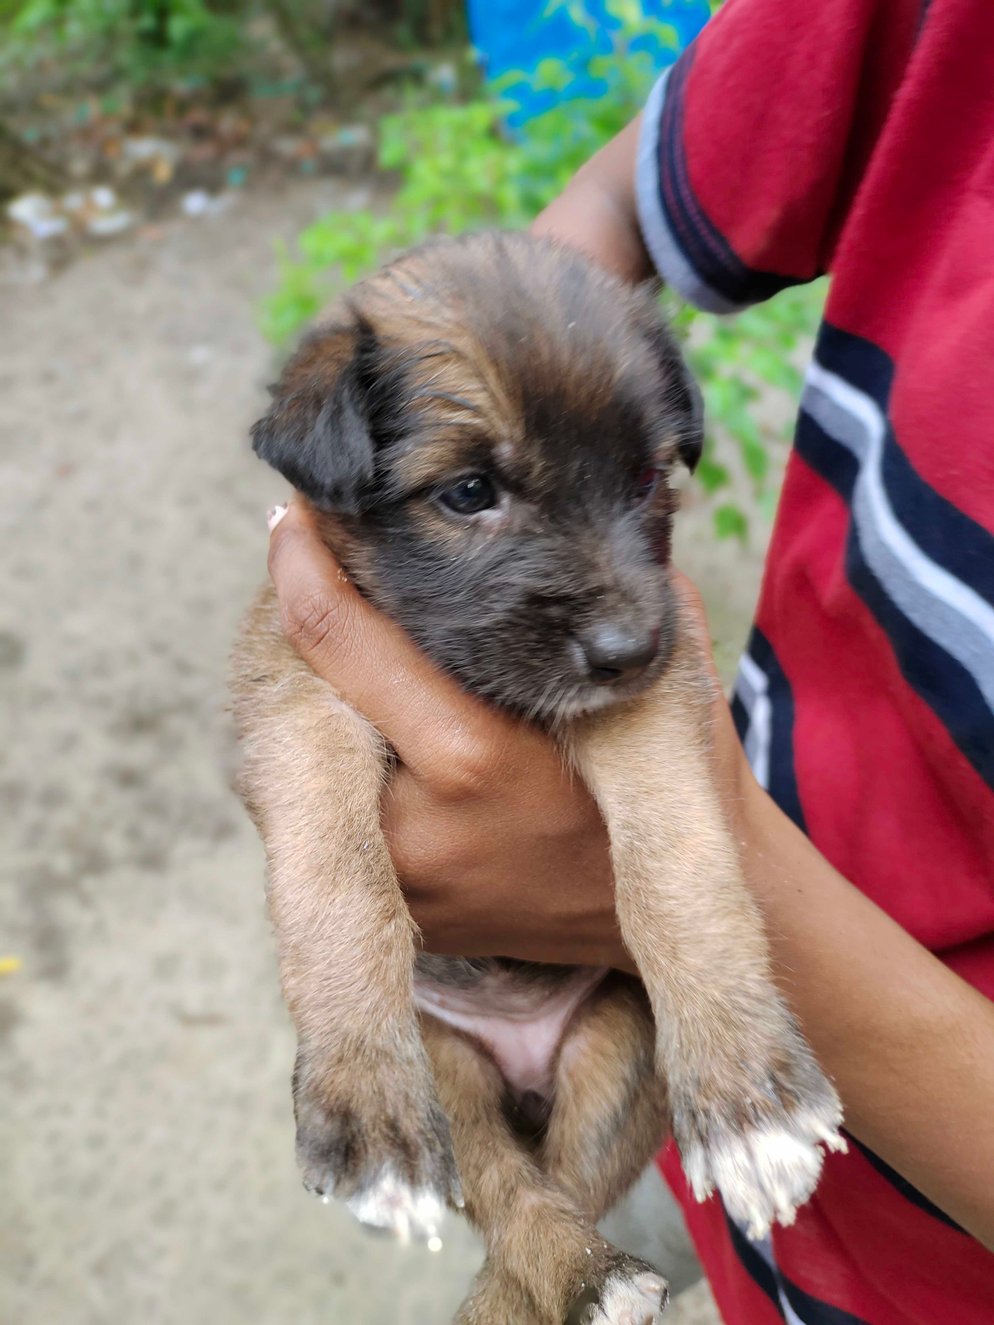 Puppies and Dogs for Adoption in Thrissur | Mr n Mrs Pet